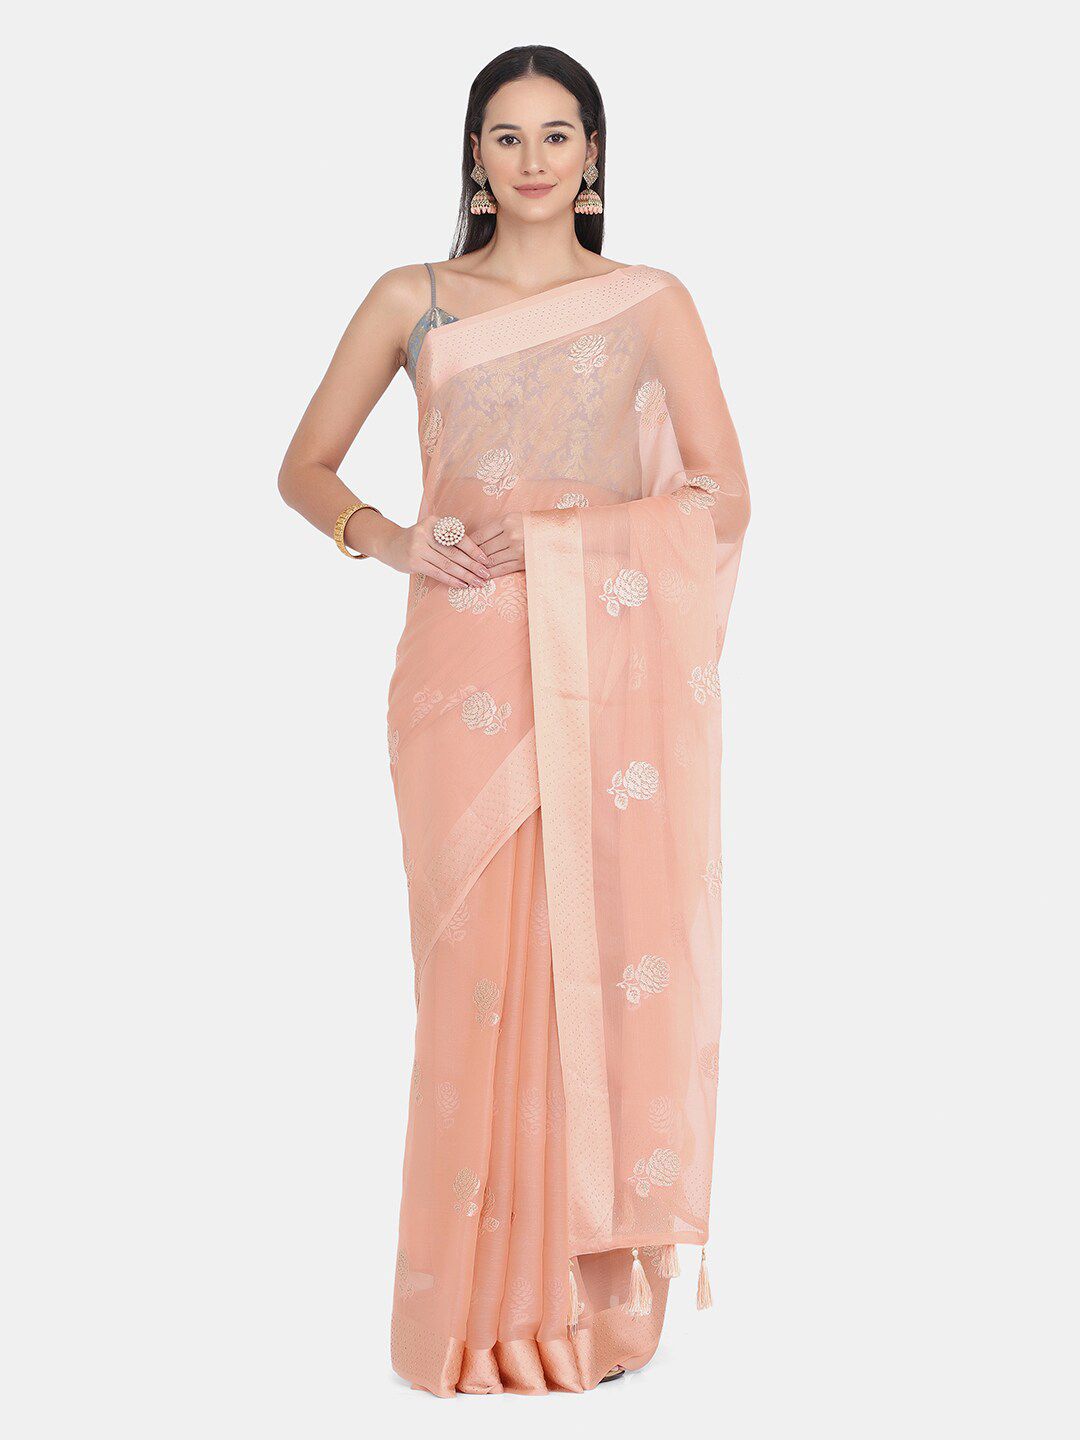 BOMBAY SELECTIONS Peach-Coloured & White Ethnic Motifs Embroidered Saree Price in India